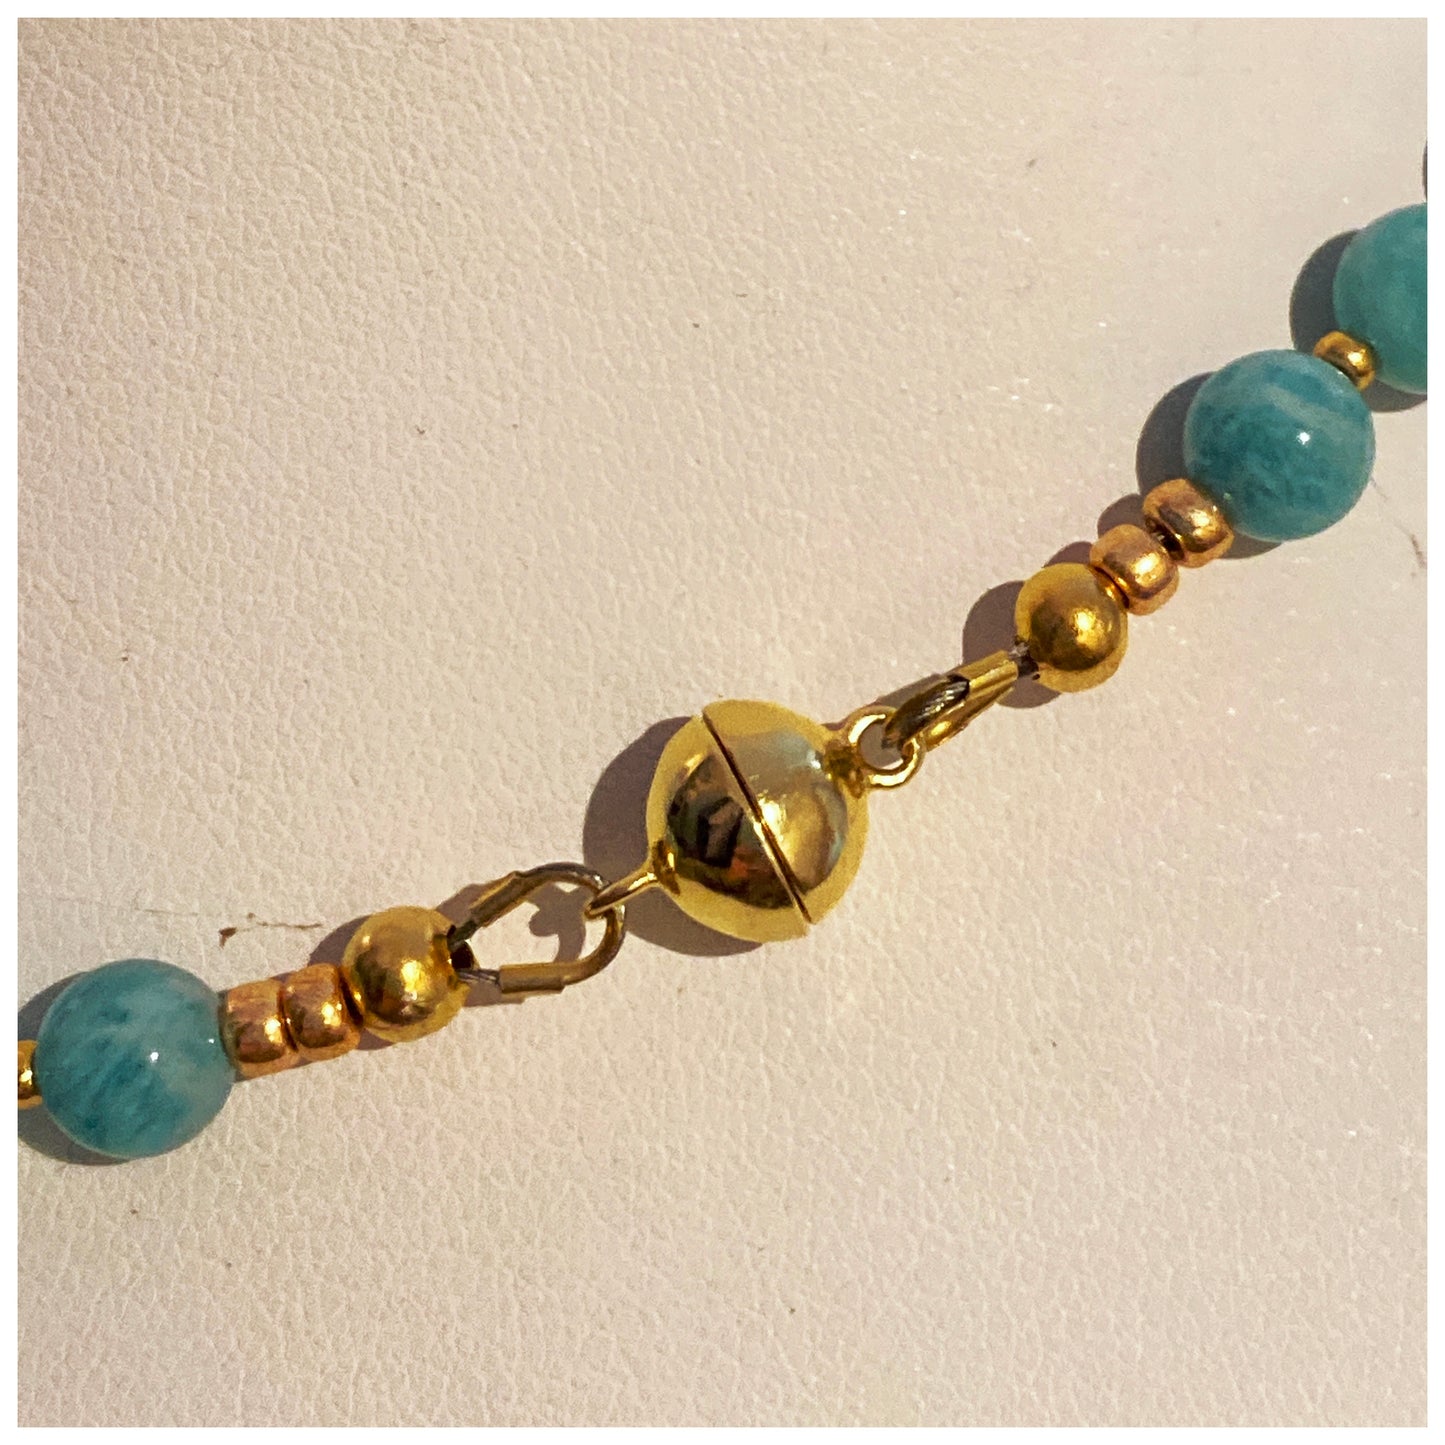 Amazonite necklace  with a magnetic clasp